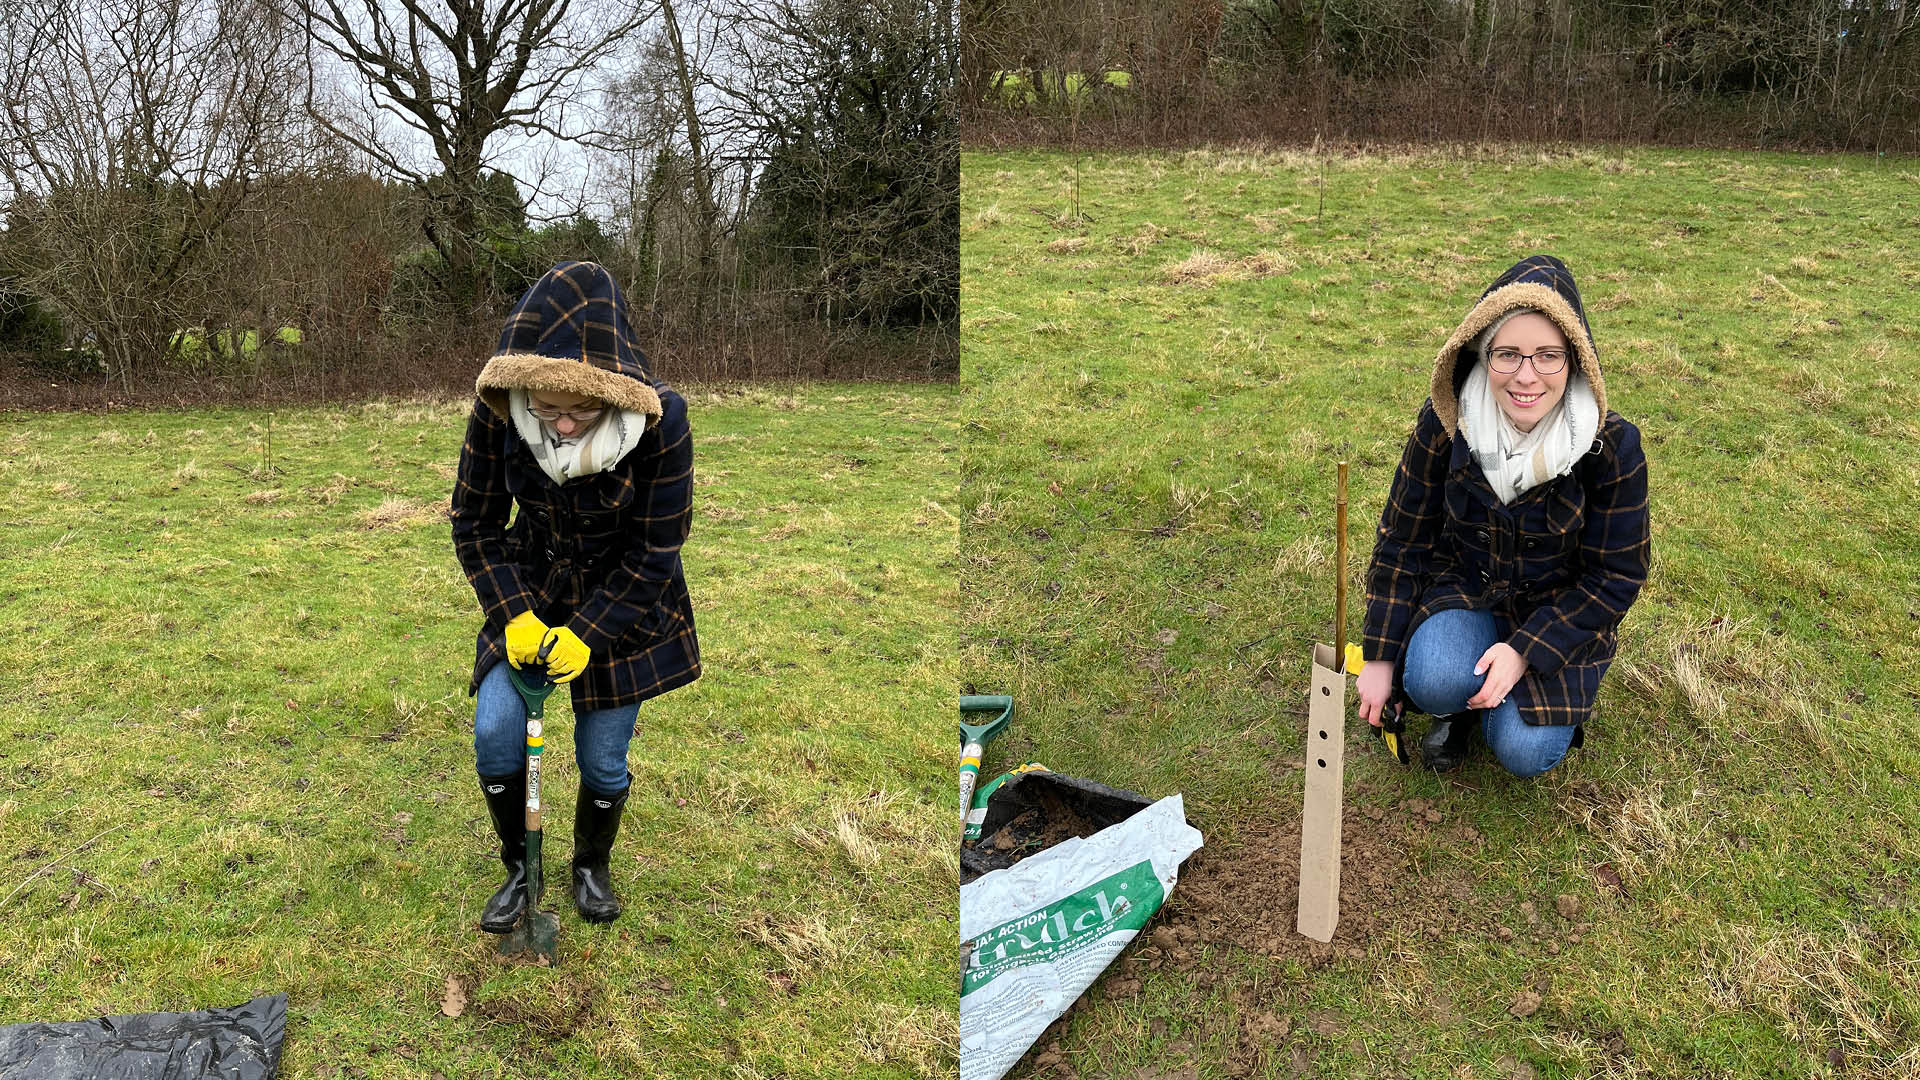 Two images of a woman in a hooded coat planting a tree, one image shows her digging a hole, the other shows her crouching next to the sapling